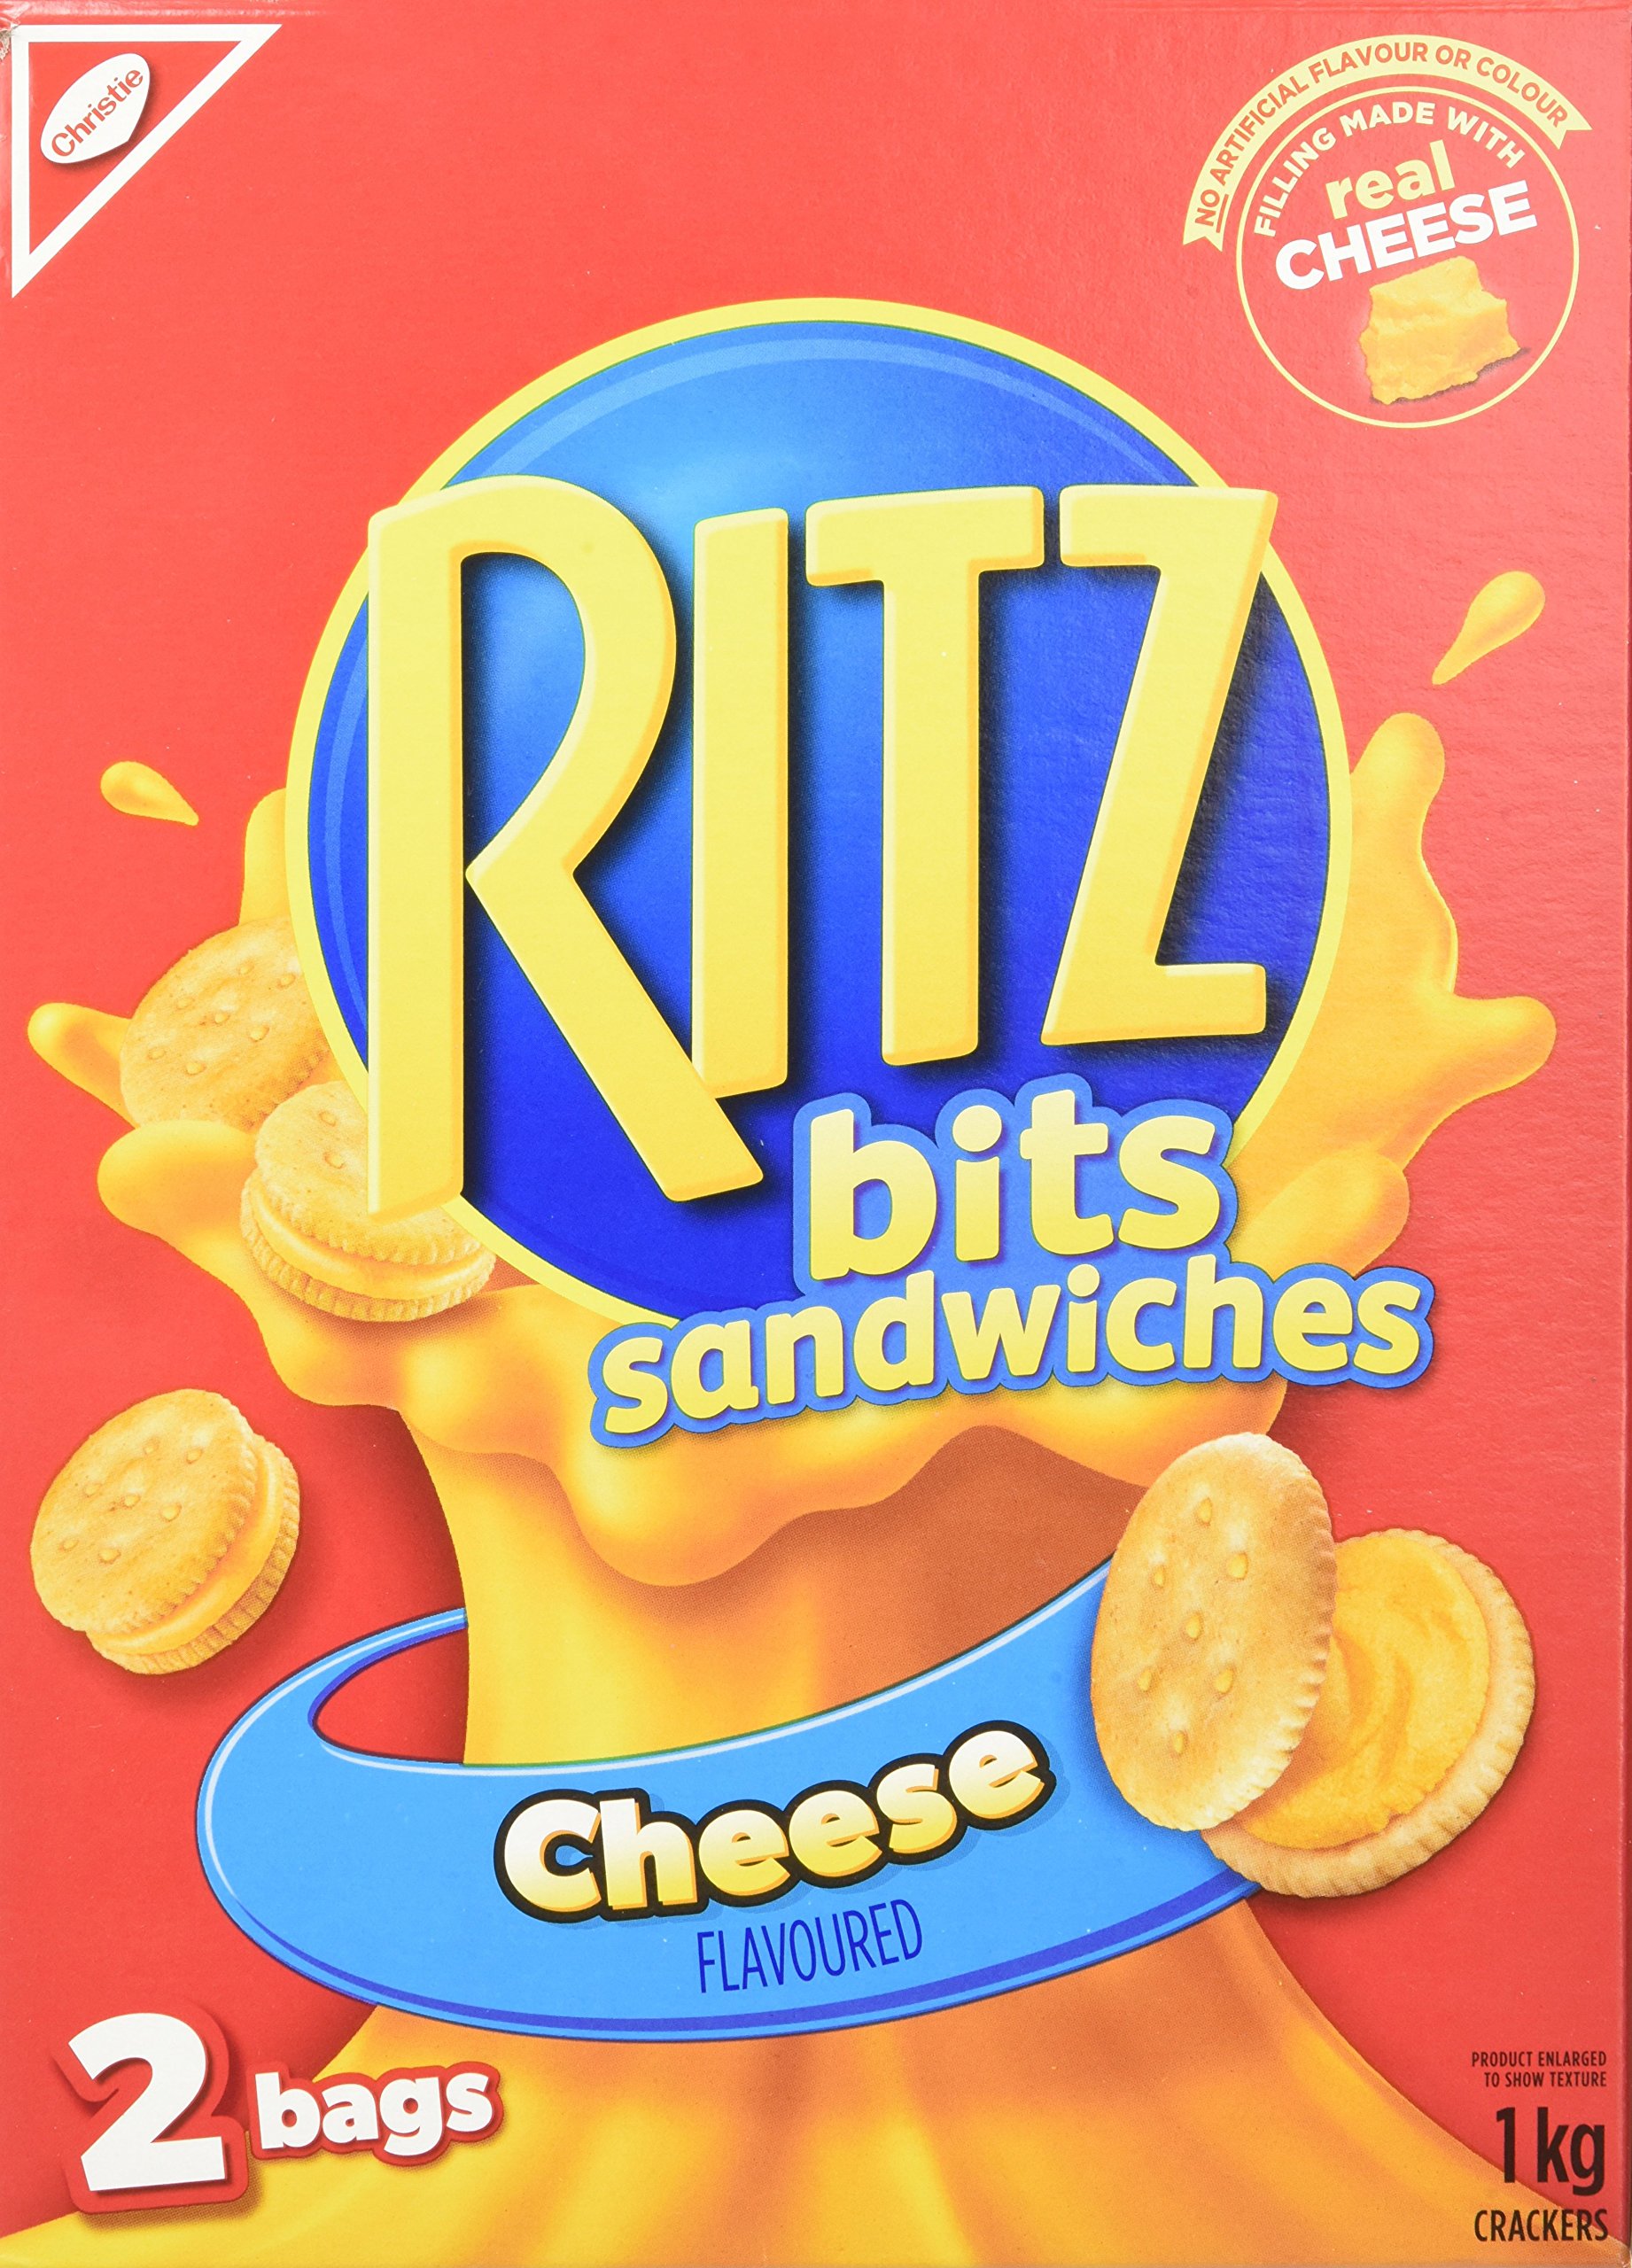 ritz bits cheese and peanut butter